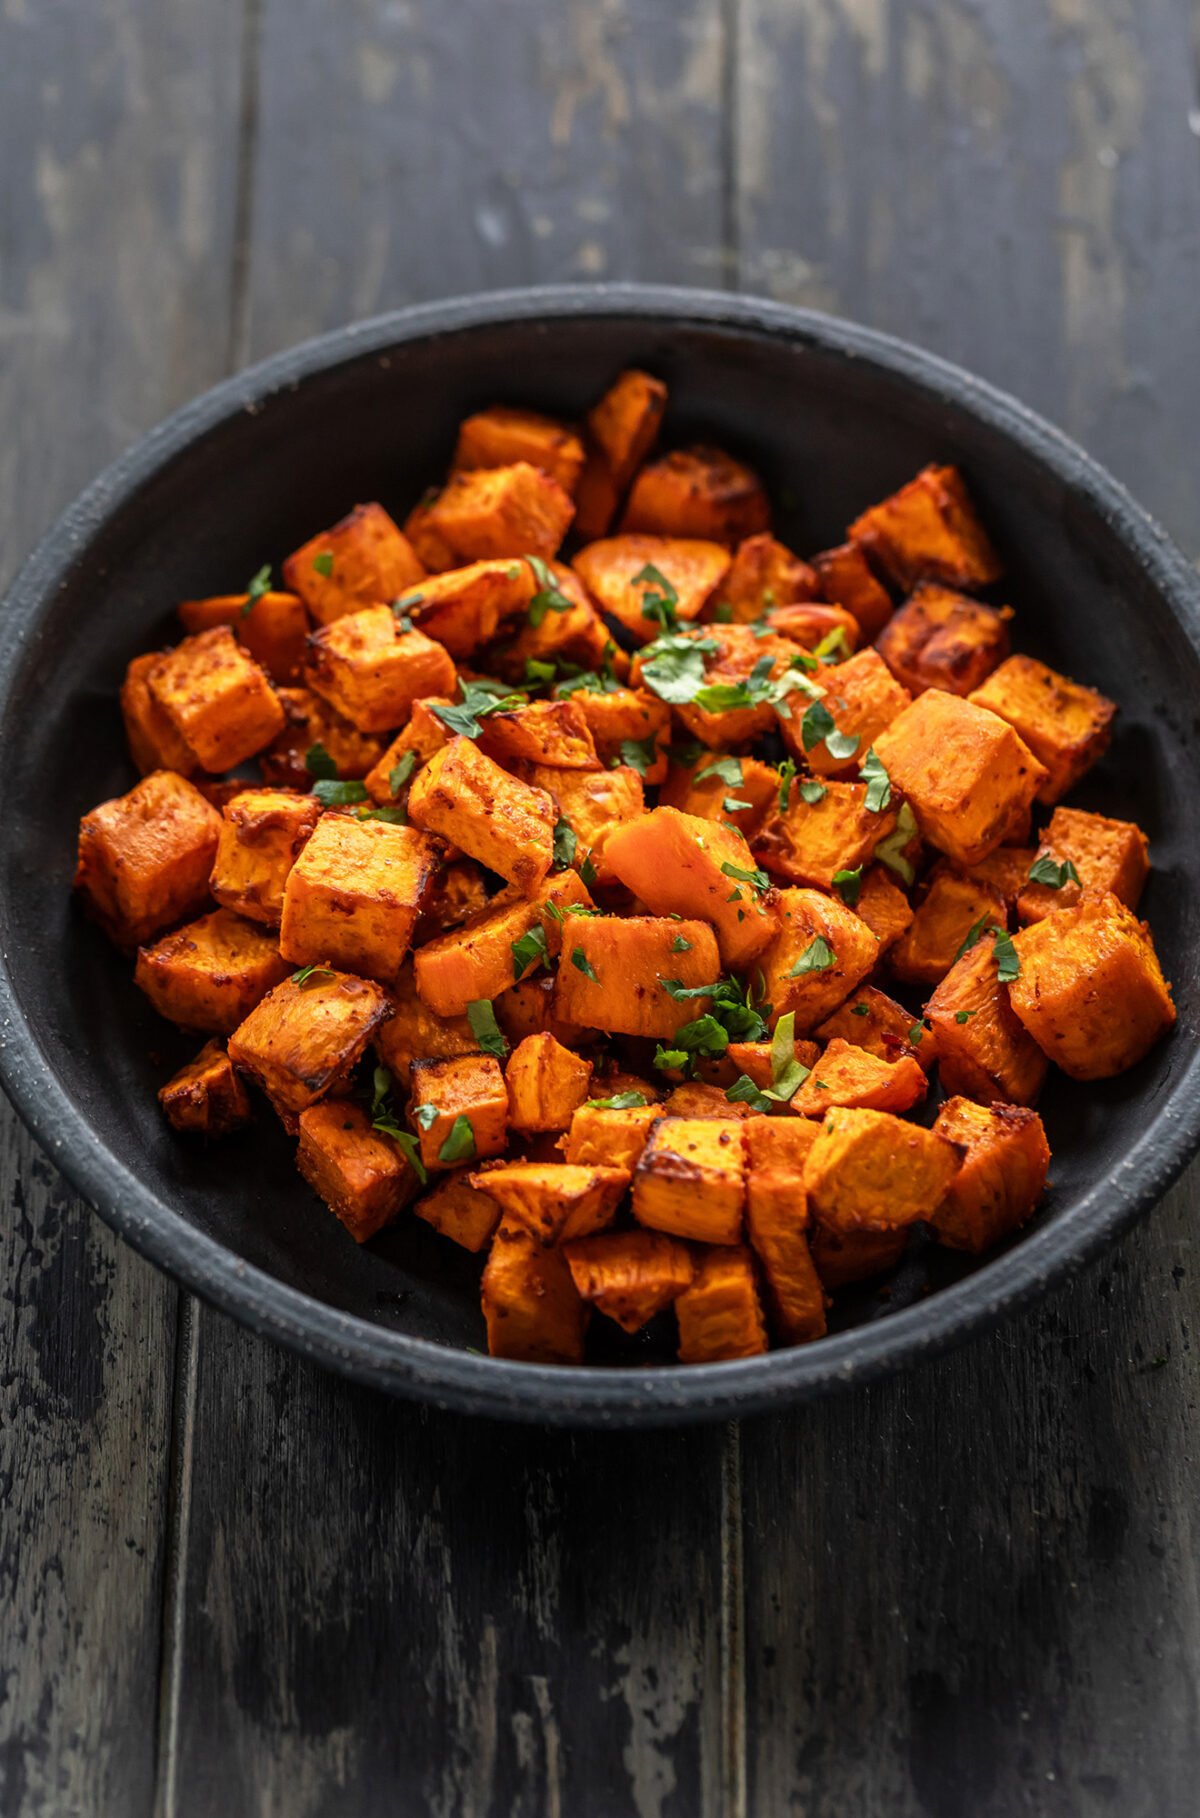 cubed roasted sweet potatoes in a black bowl with garnish of parsley